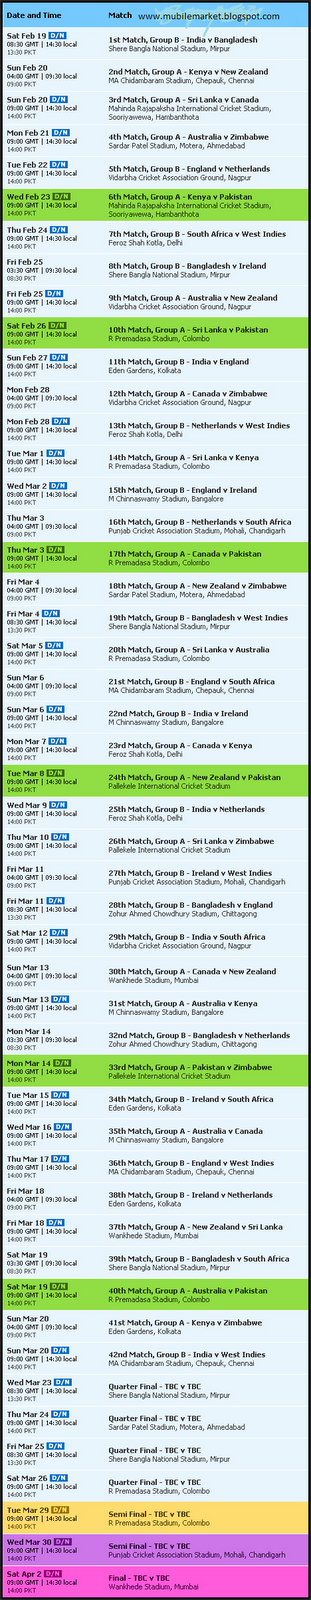 world cup cricket 2011 schedule with. The World Cup will use